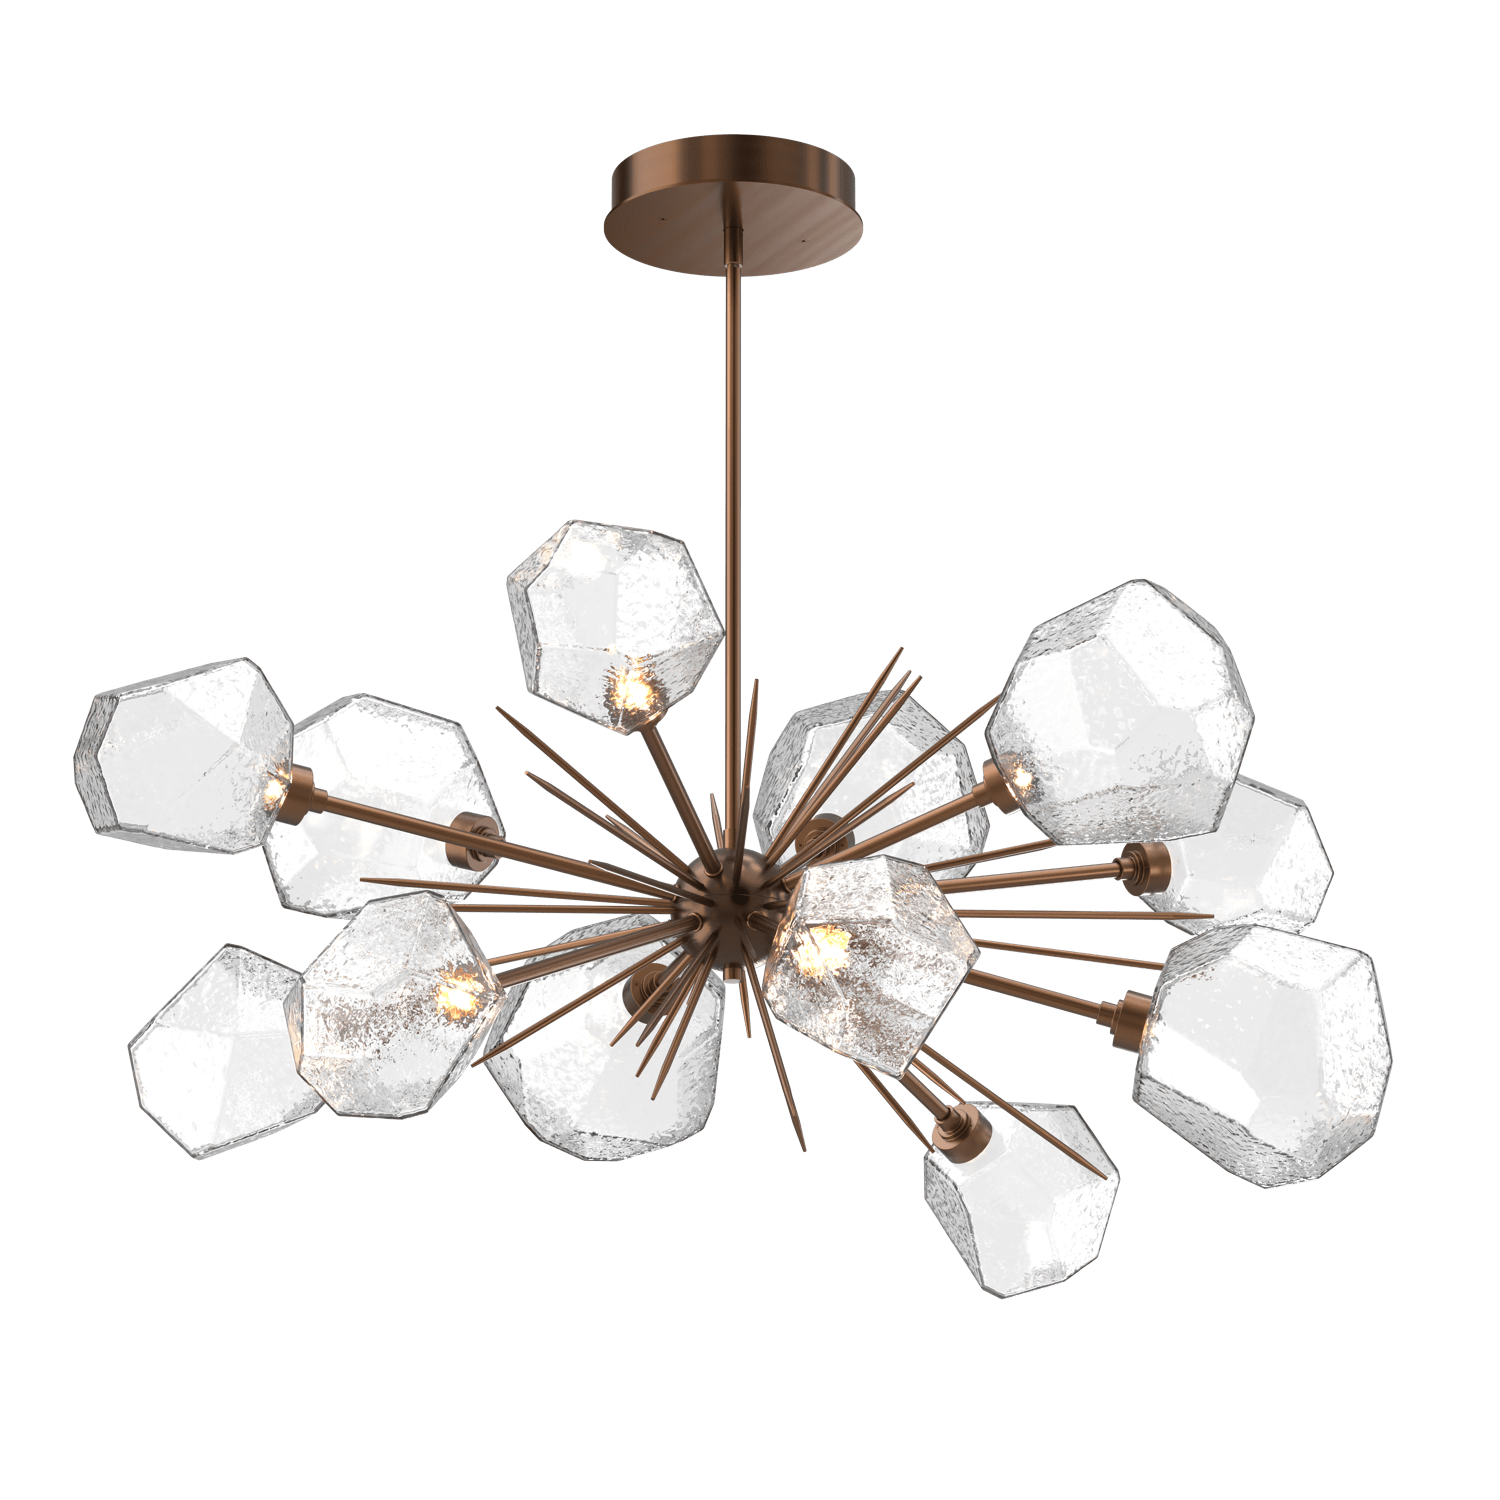 PLB0039-0D-RB-C-Hammerton-Studio-Gem-43-inch-oval-starburst-chandelier-with-oil-rubbed-bronze-finish-and-clear-blown-glass-shades-and-LED-lamping